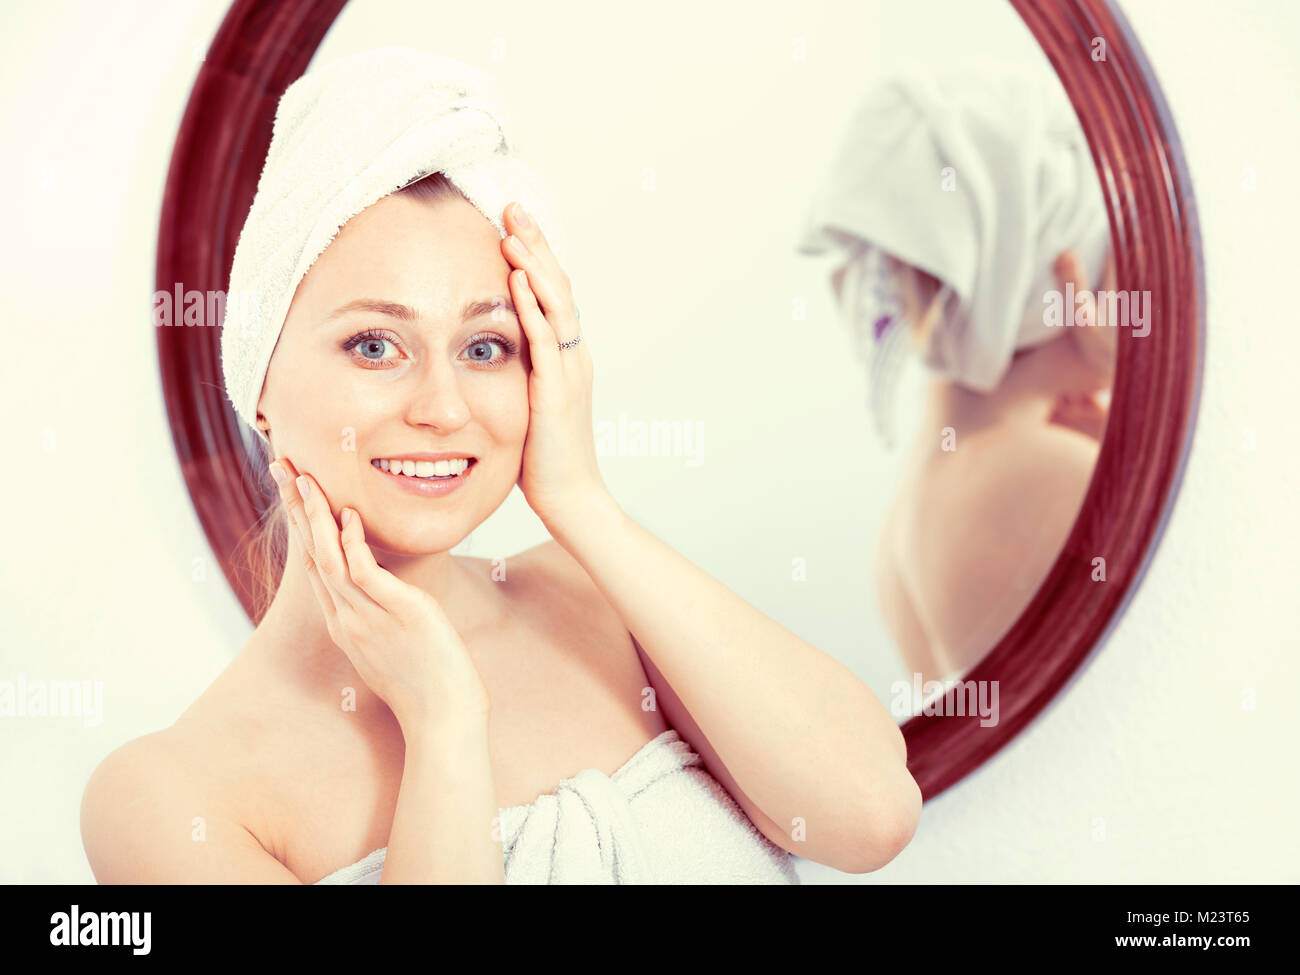 Cheerful Woman Wearing A Towel After Shower Looking At Herself In The